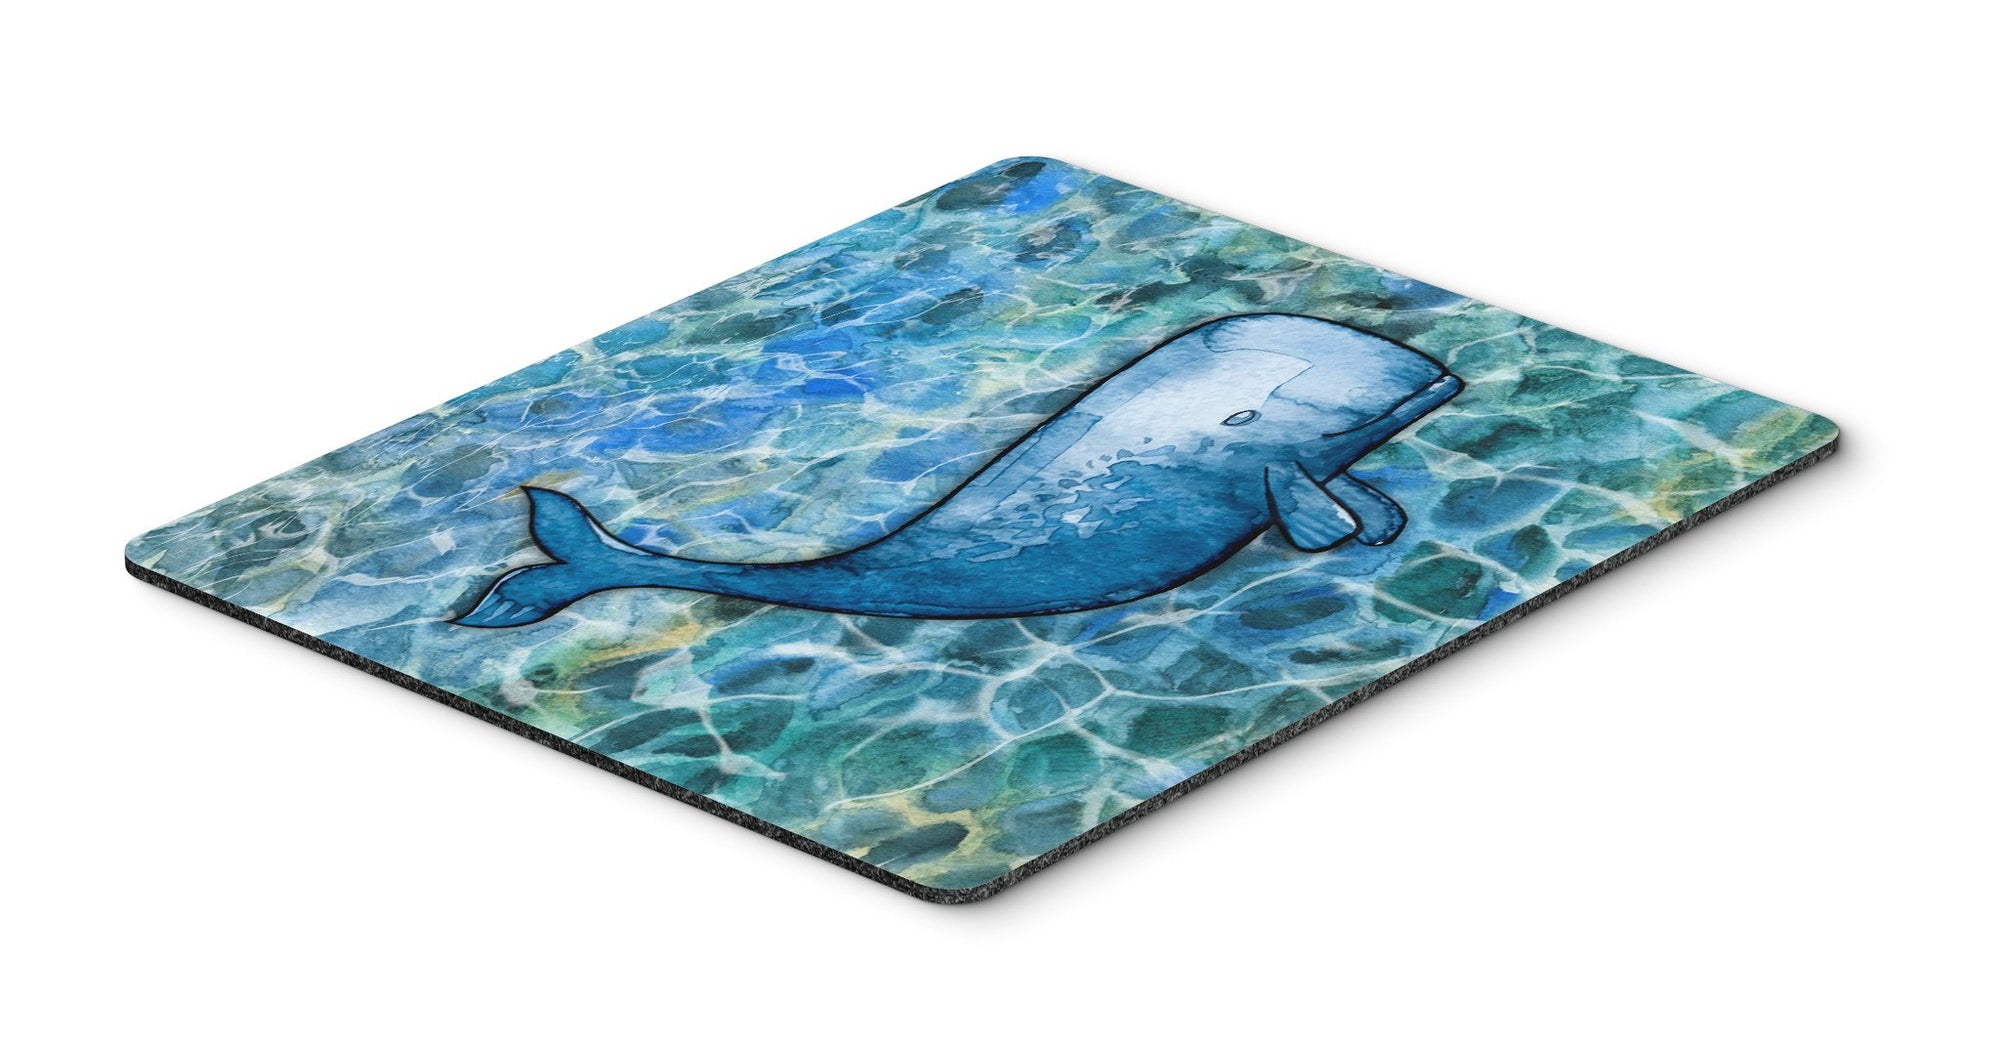 Sperm Whale Cachalot Mouse Pad, Hot Pad or Trivet BB5354MP by Caroline's Treasures